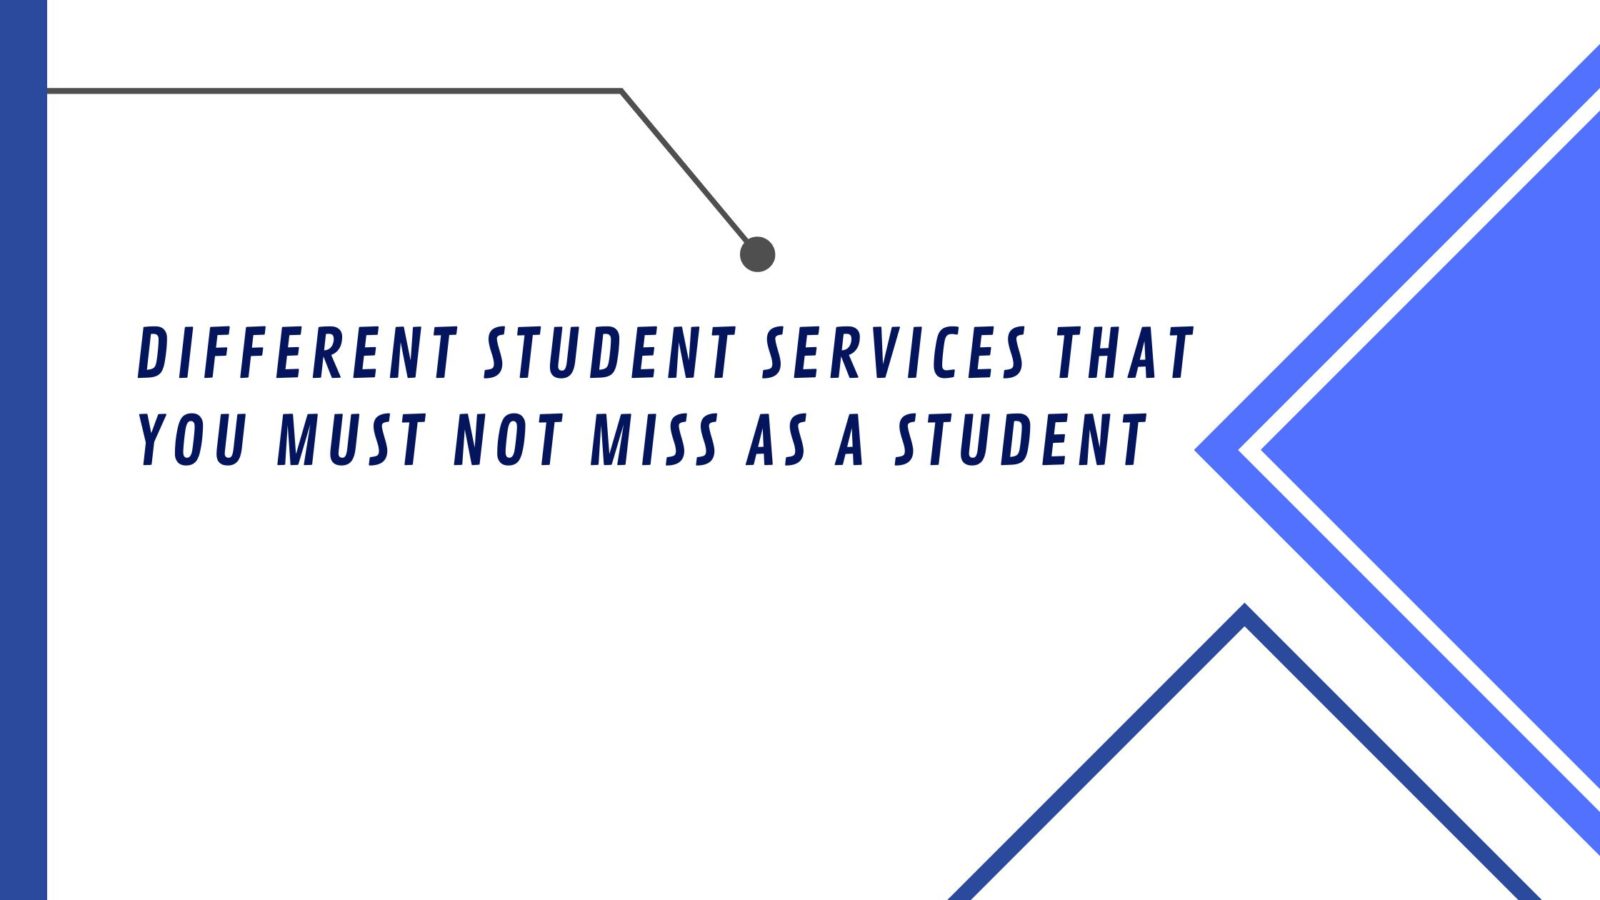 Different Student Services That You Must Not Miss as a Student